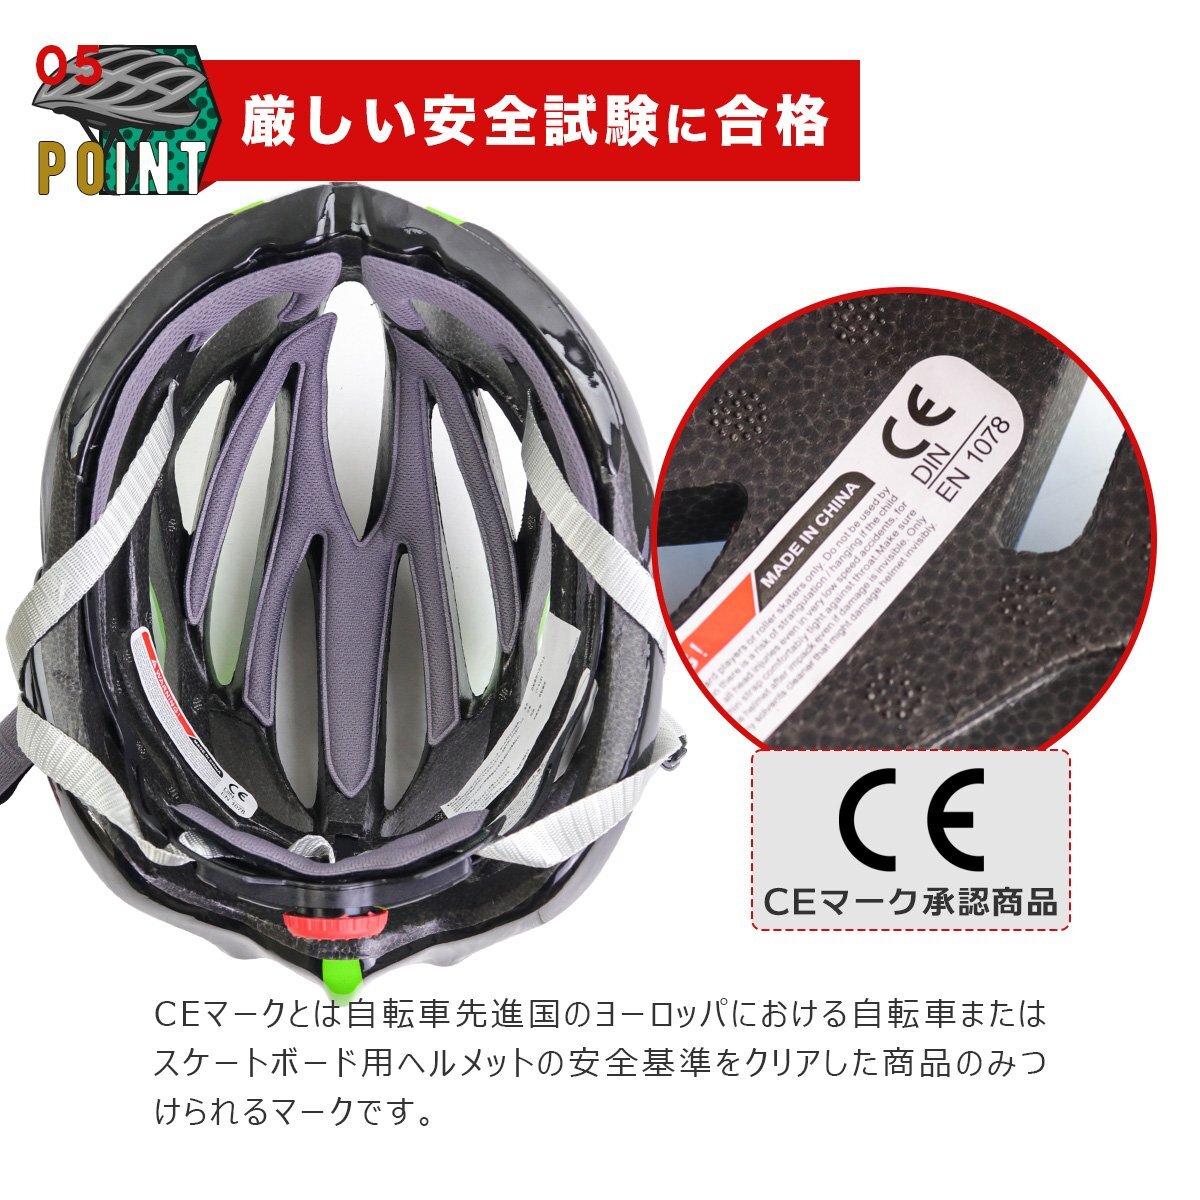 [ free shipping ] bicycle helmet head .53-63cm super light weight stylish man and woman use adult electric scooter CE standard commuting going to school ventilation yy-018t